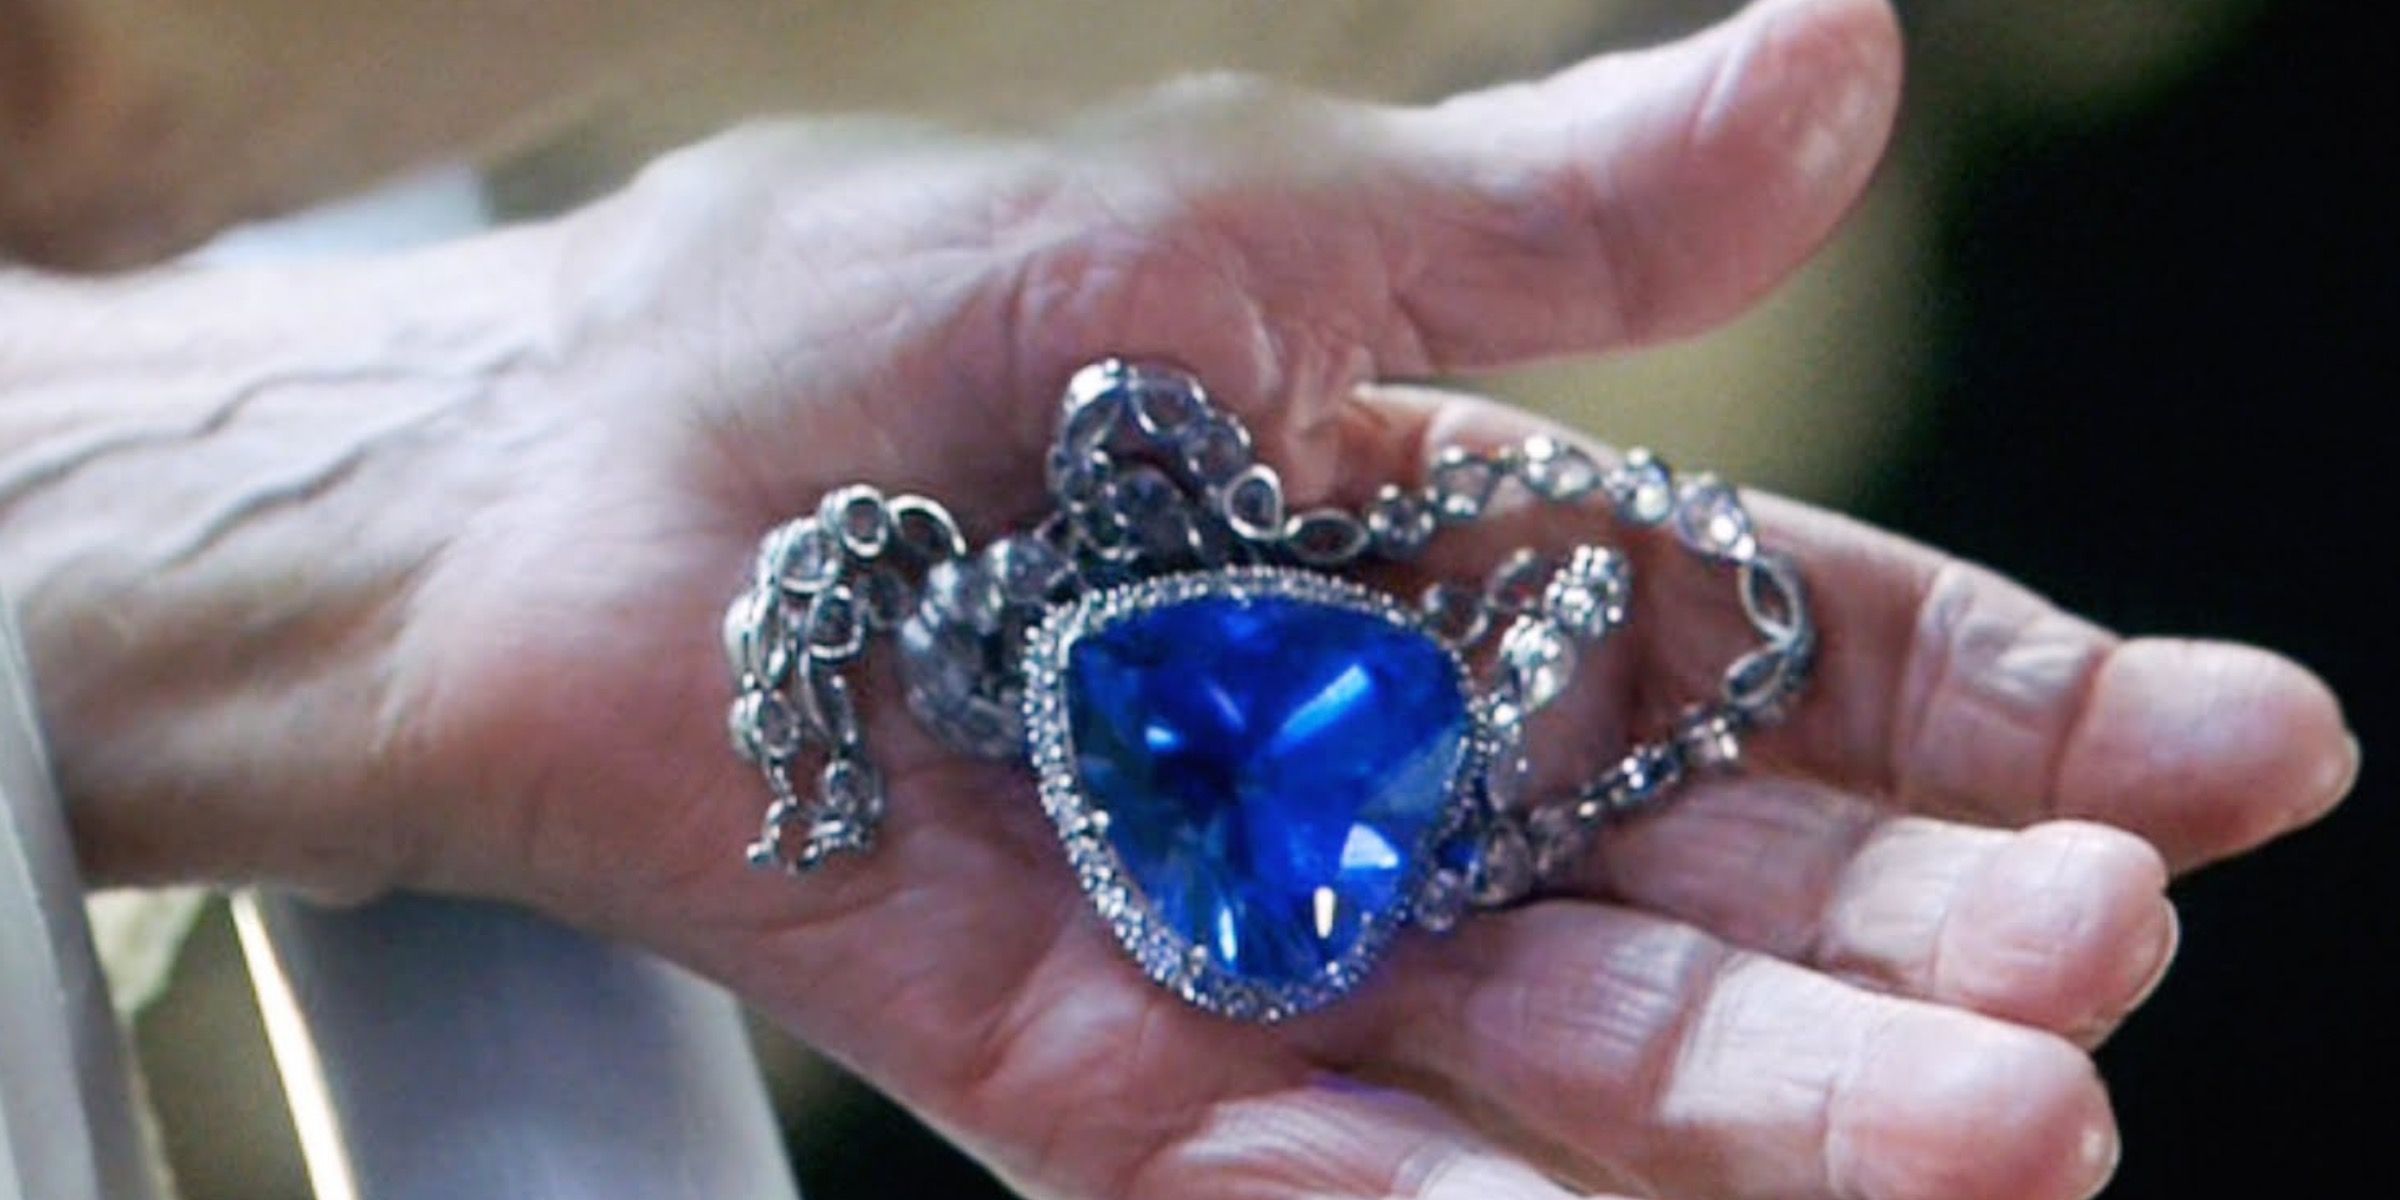 The Heart of the Ocean diamond necklace in Titanic.